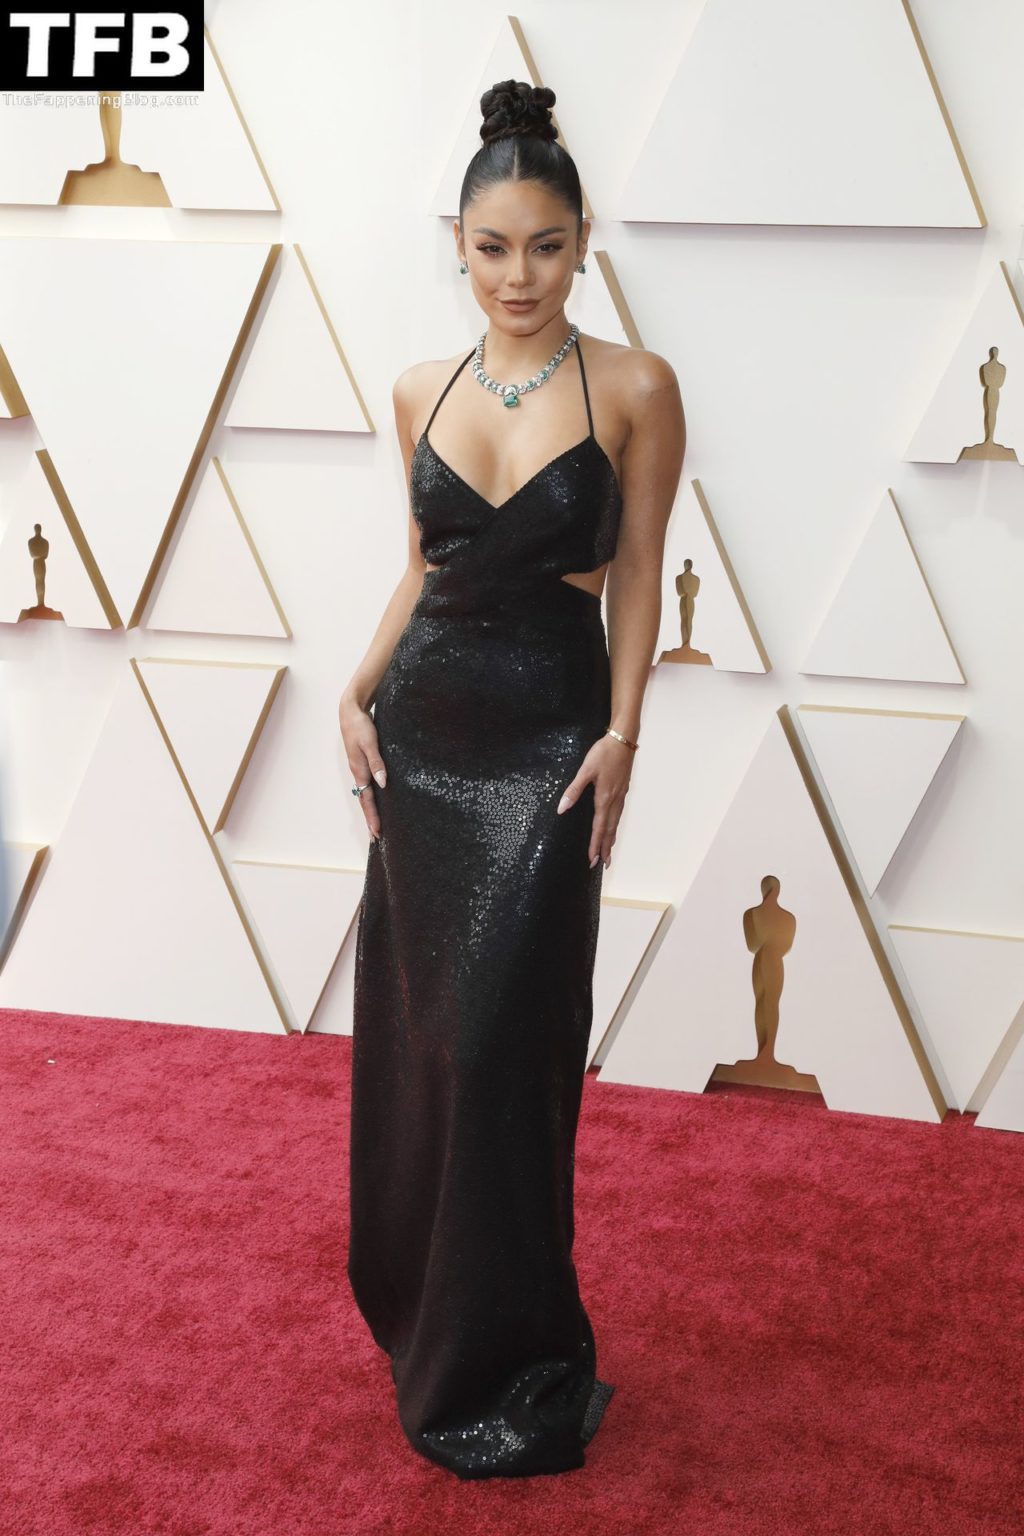 Vanessa Hudgens Sexy The Fappening Blog 72 2 1024x1536 - Vanessa Hudgens Poses on the Red Carpet at the 94th Annual Academy Awards (83 Photos)